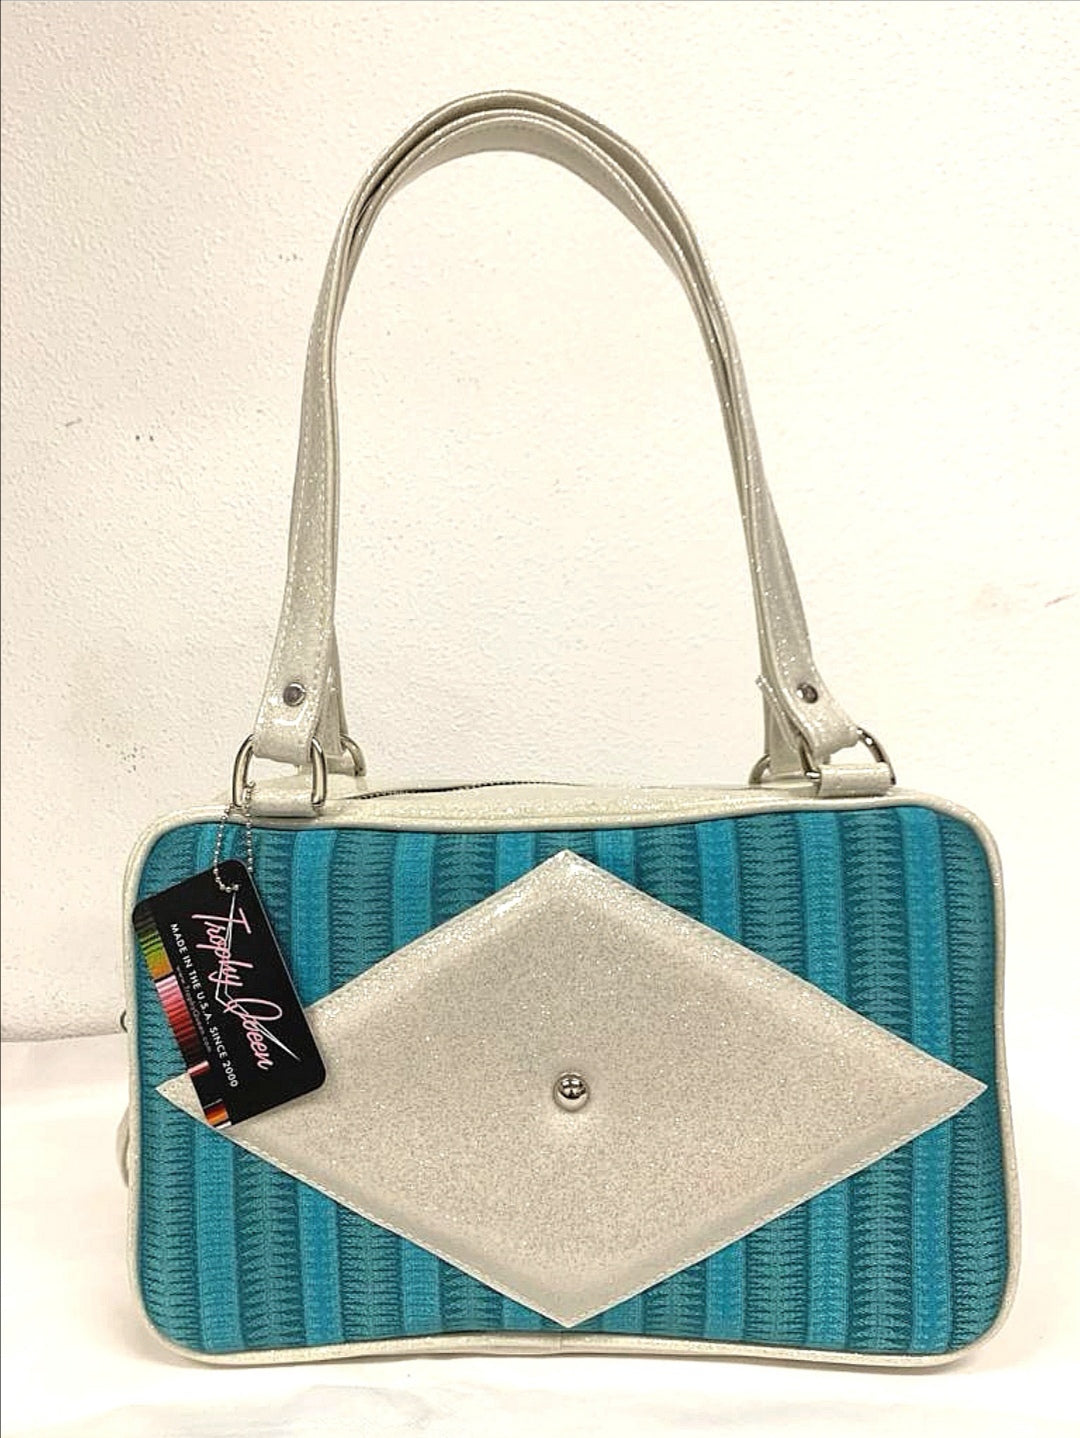 Bel Air Tote with Limited Edition Turquoise '65 Chevy Fabric and White Glitter Vinyl with Plush Leopard Lining. Made from NOS Vintage 1965 Vintage Chevy Upholstery Fabric, this unique bag has matching vinyl zipper pull, nickel feet, inside zipper pocket with serial number and open divided pocket with signature Trophy Queen label. The straps are approximately 25” and come with an extra set of replacement straps. Locally made and ships from California.